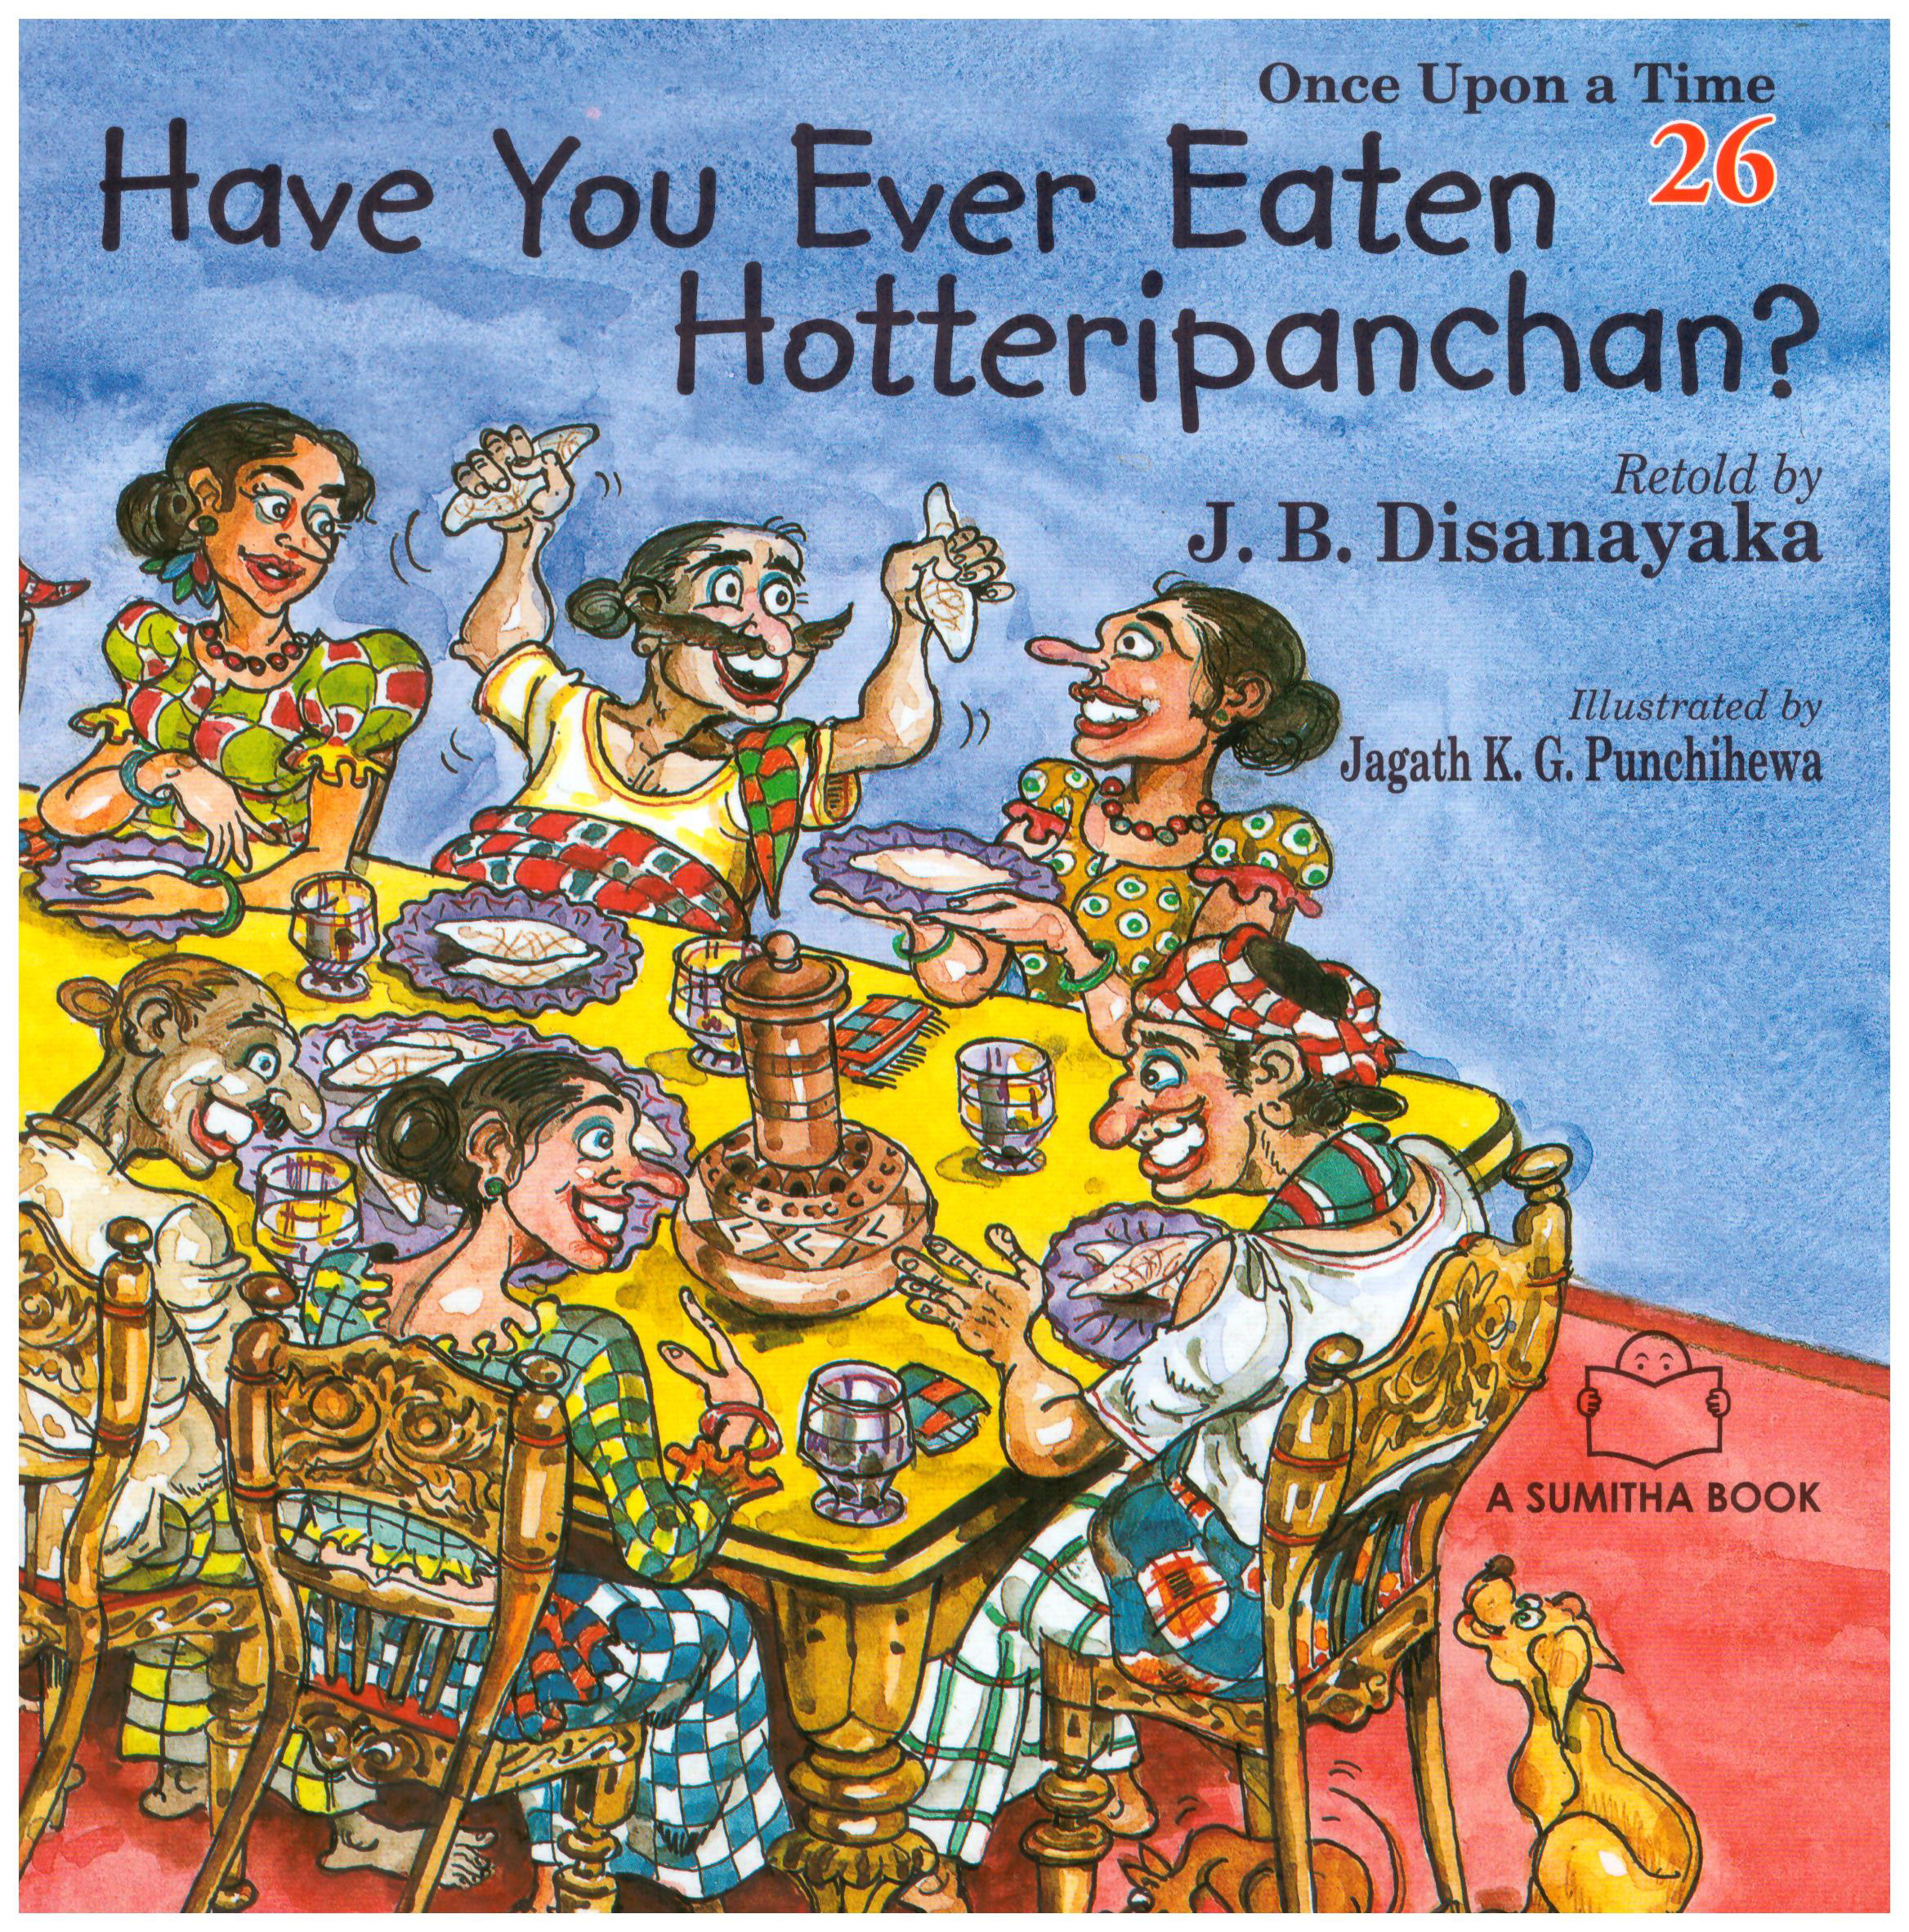 Once Upon a Time 26 - Have You Ever Eaten Hotteripanchan